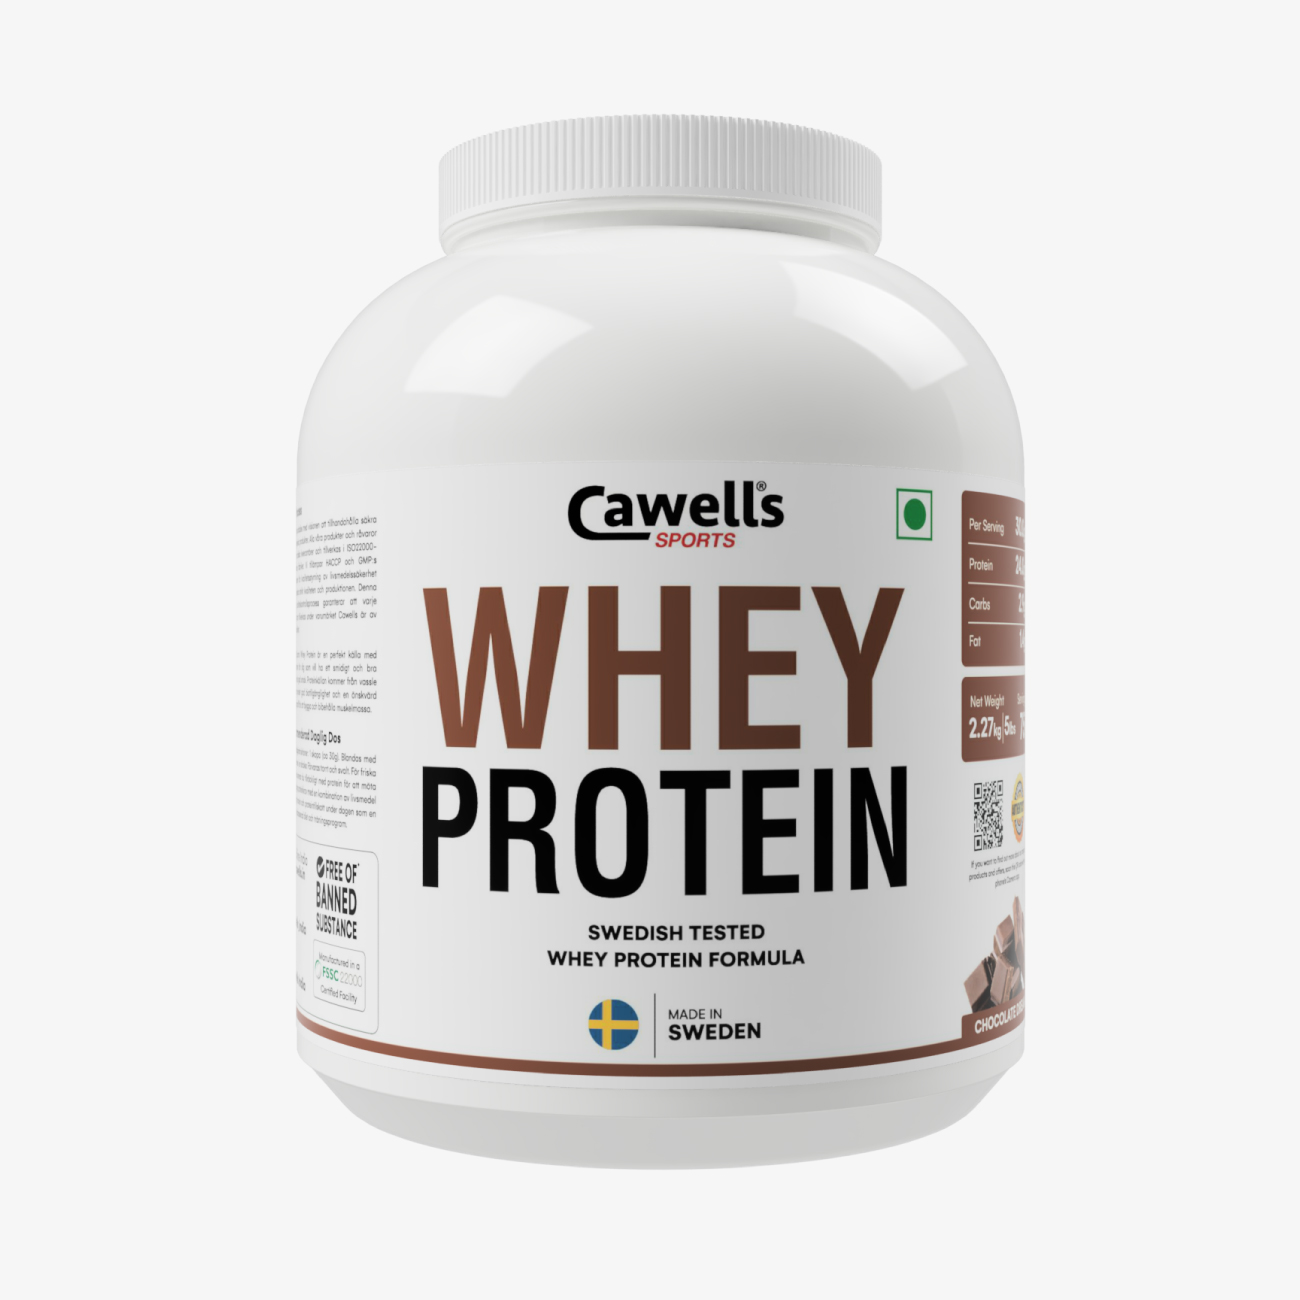 Whey Protein Chocolate Powder for Weight Loss